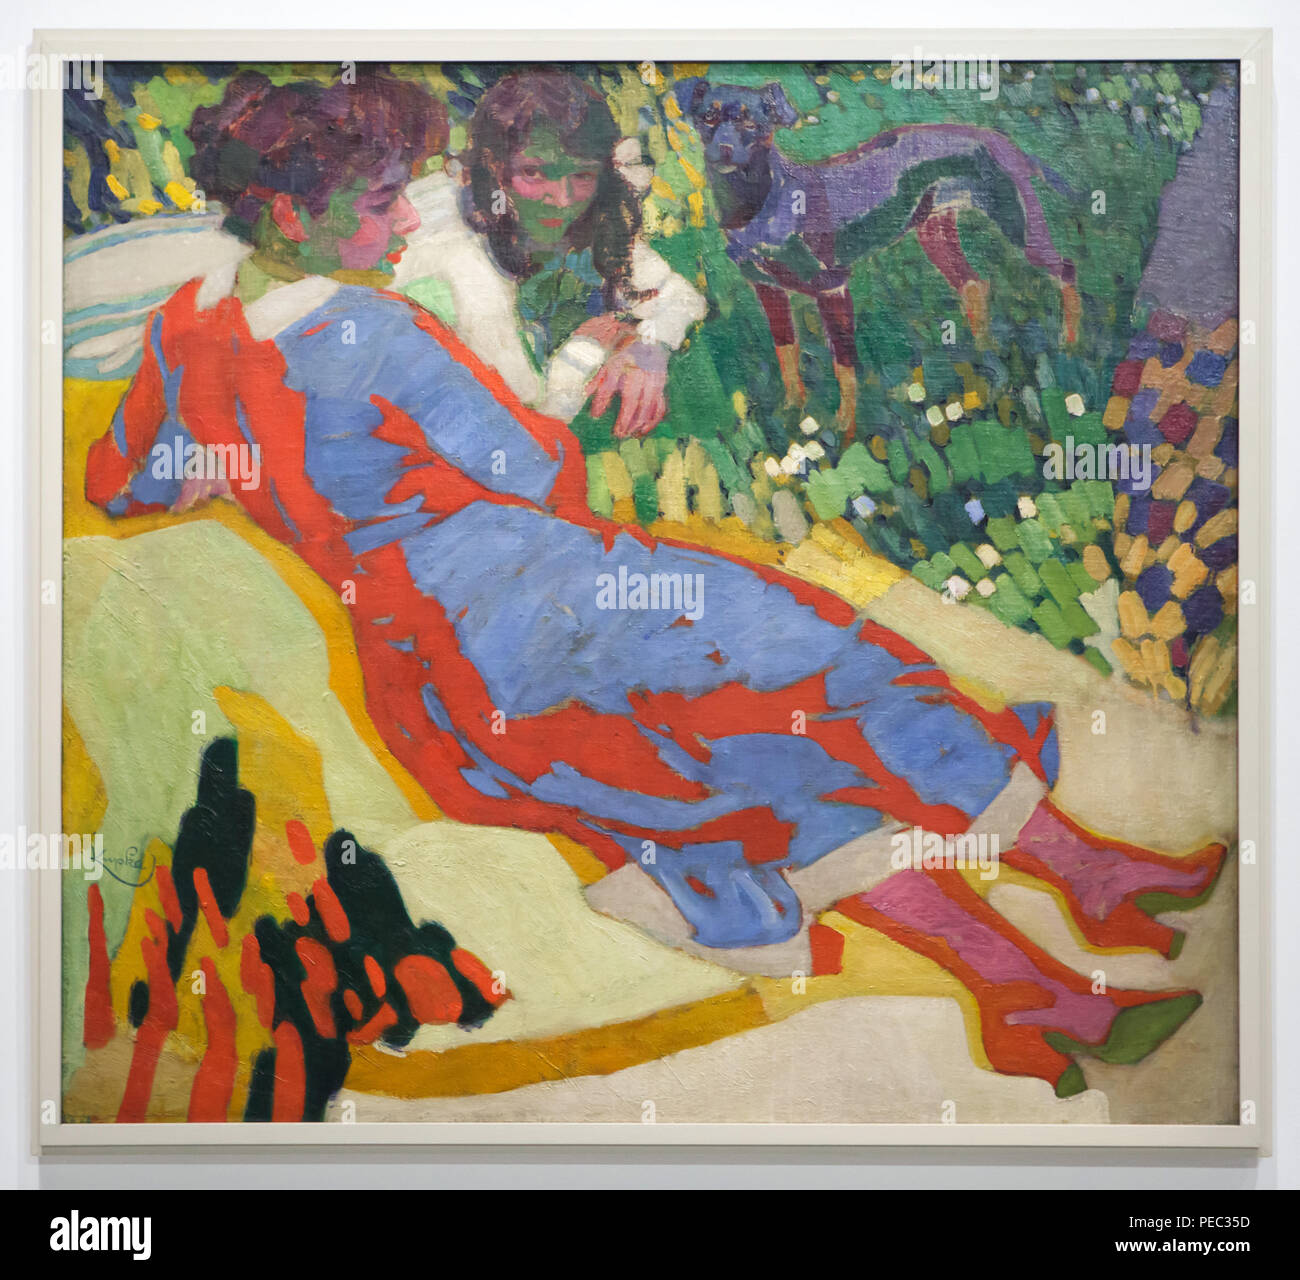 Painting 'Family Portrait' by Czech modernist painter František Kupka (1910) on display at his retrospective exhibition in the Grand Palais in Paris, France. The exhibition runs till 30 July 2018. Stock Photo